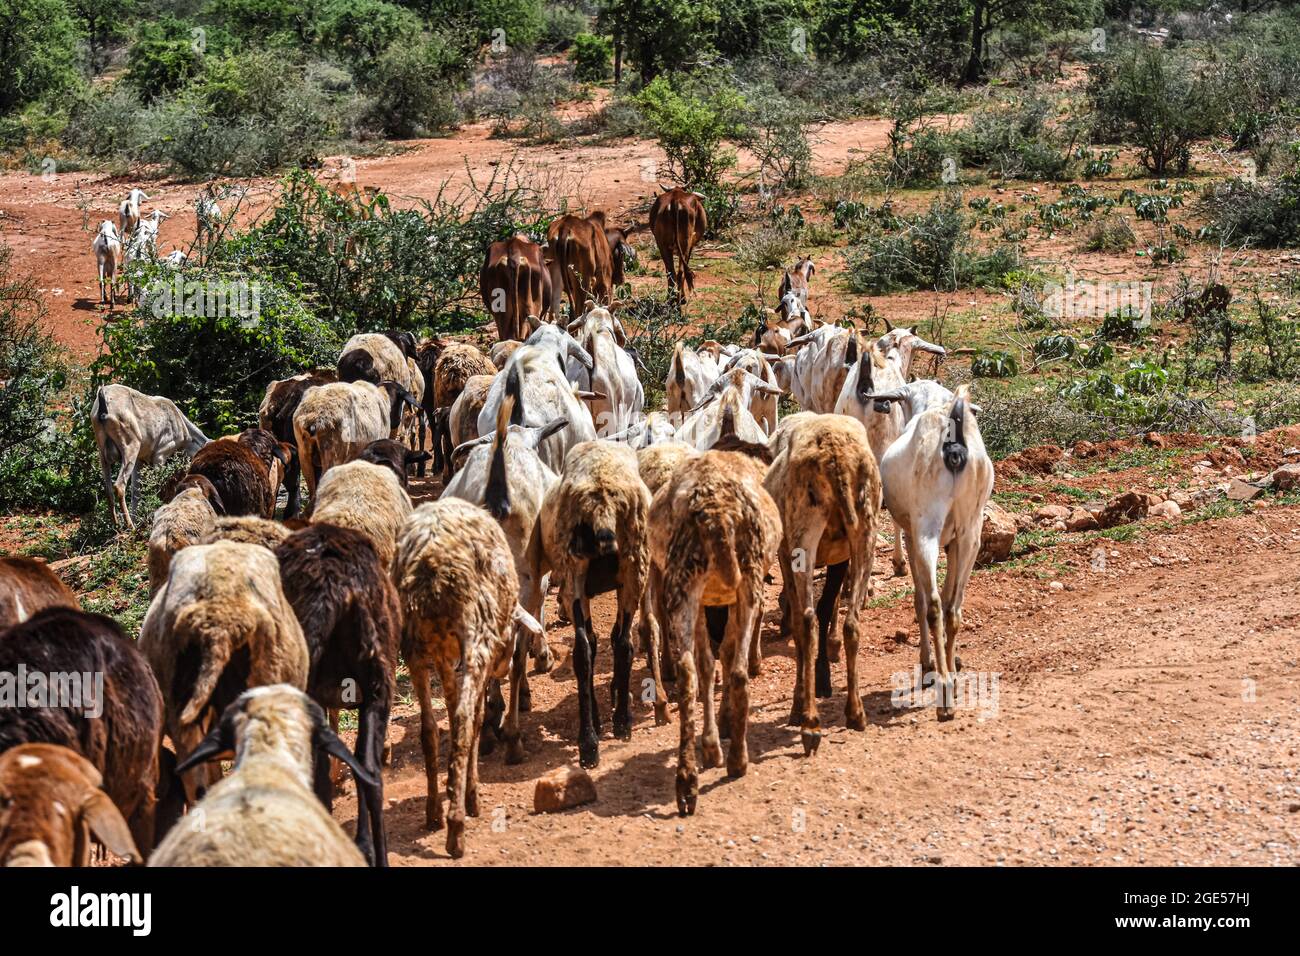 A herd of goats and cows tended by Maasai pastoralists are moved in the dry central Kenyan landscape. Stock Photo